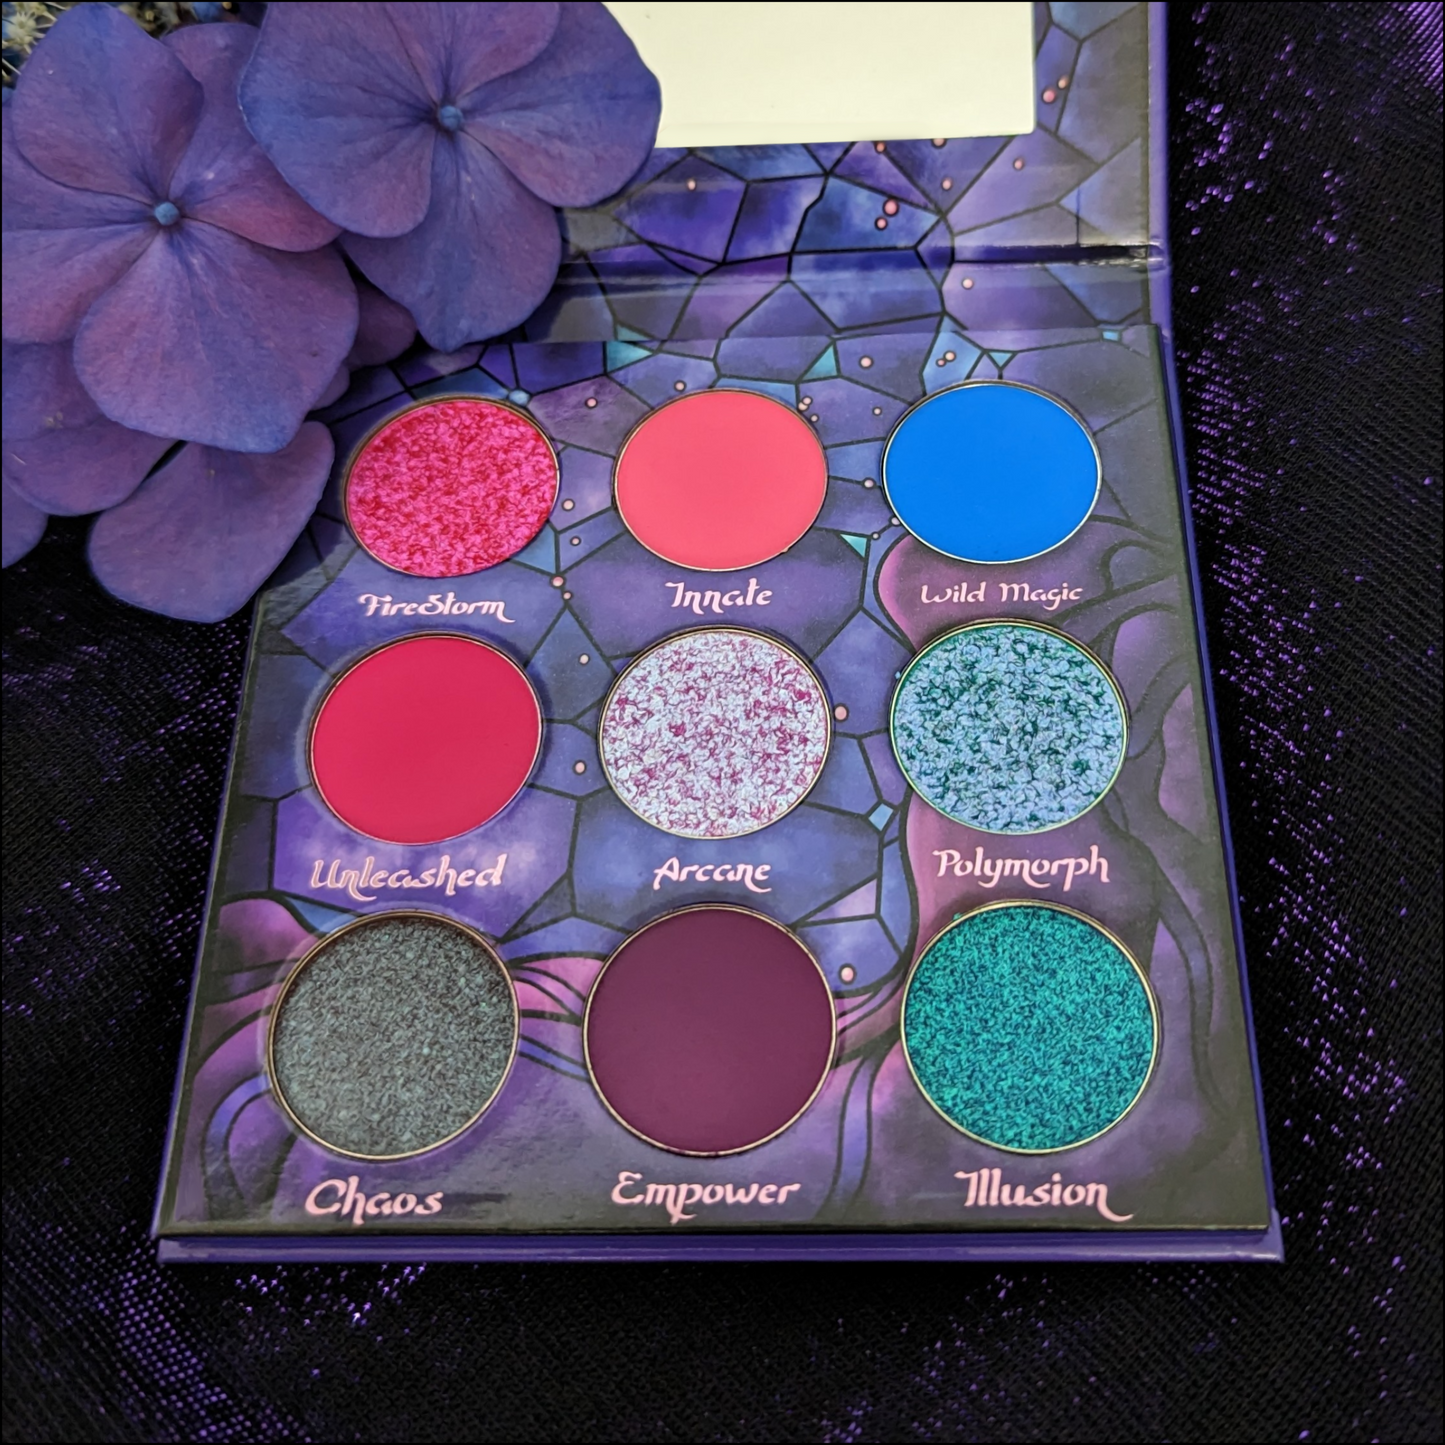 Sorcerer palette opened by Fantasy Cosmetica